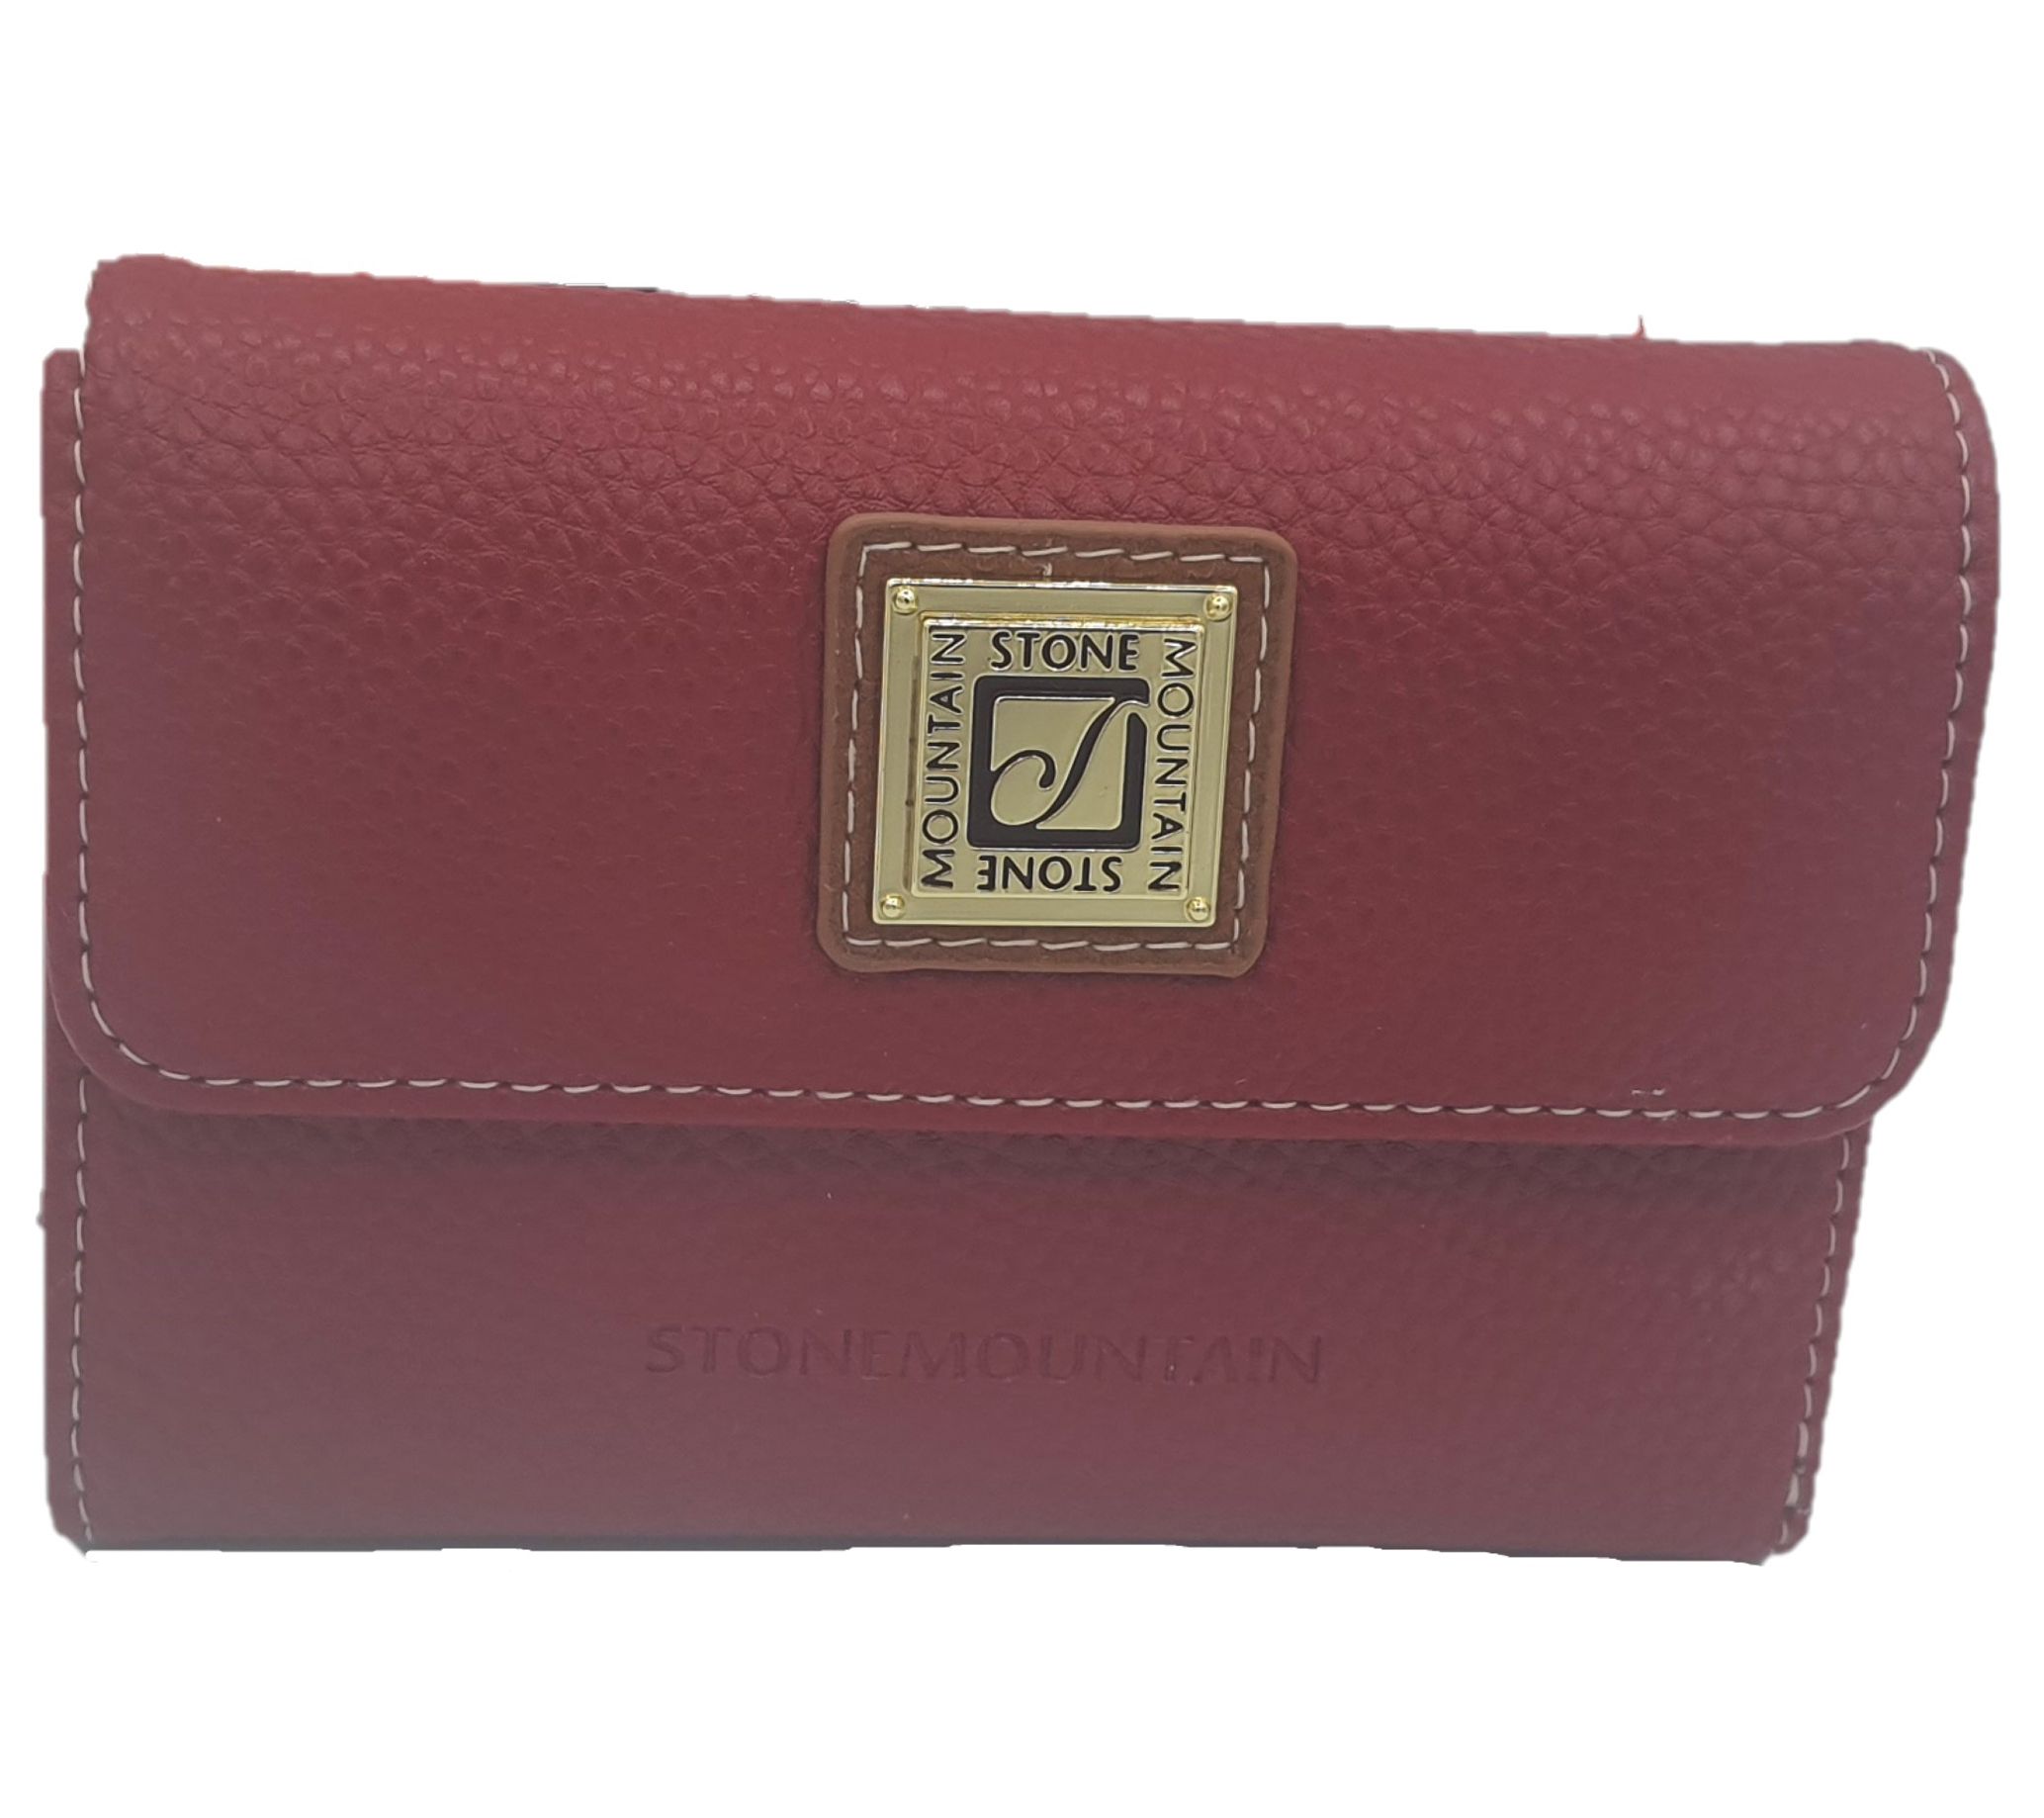 Stone Mountain Cornell Bonded Leather Large Zip Wallet - Red 